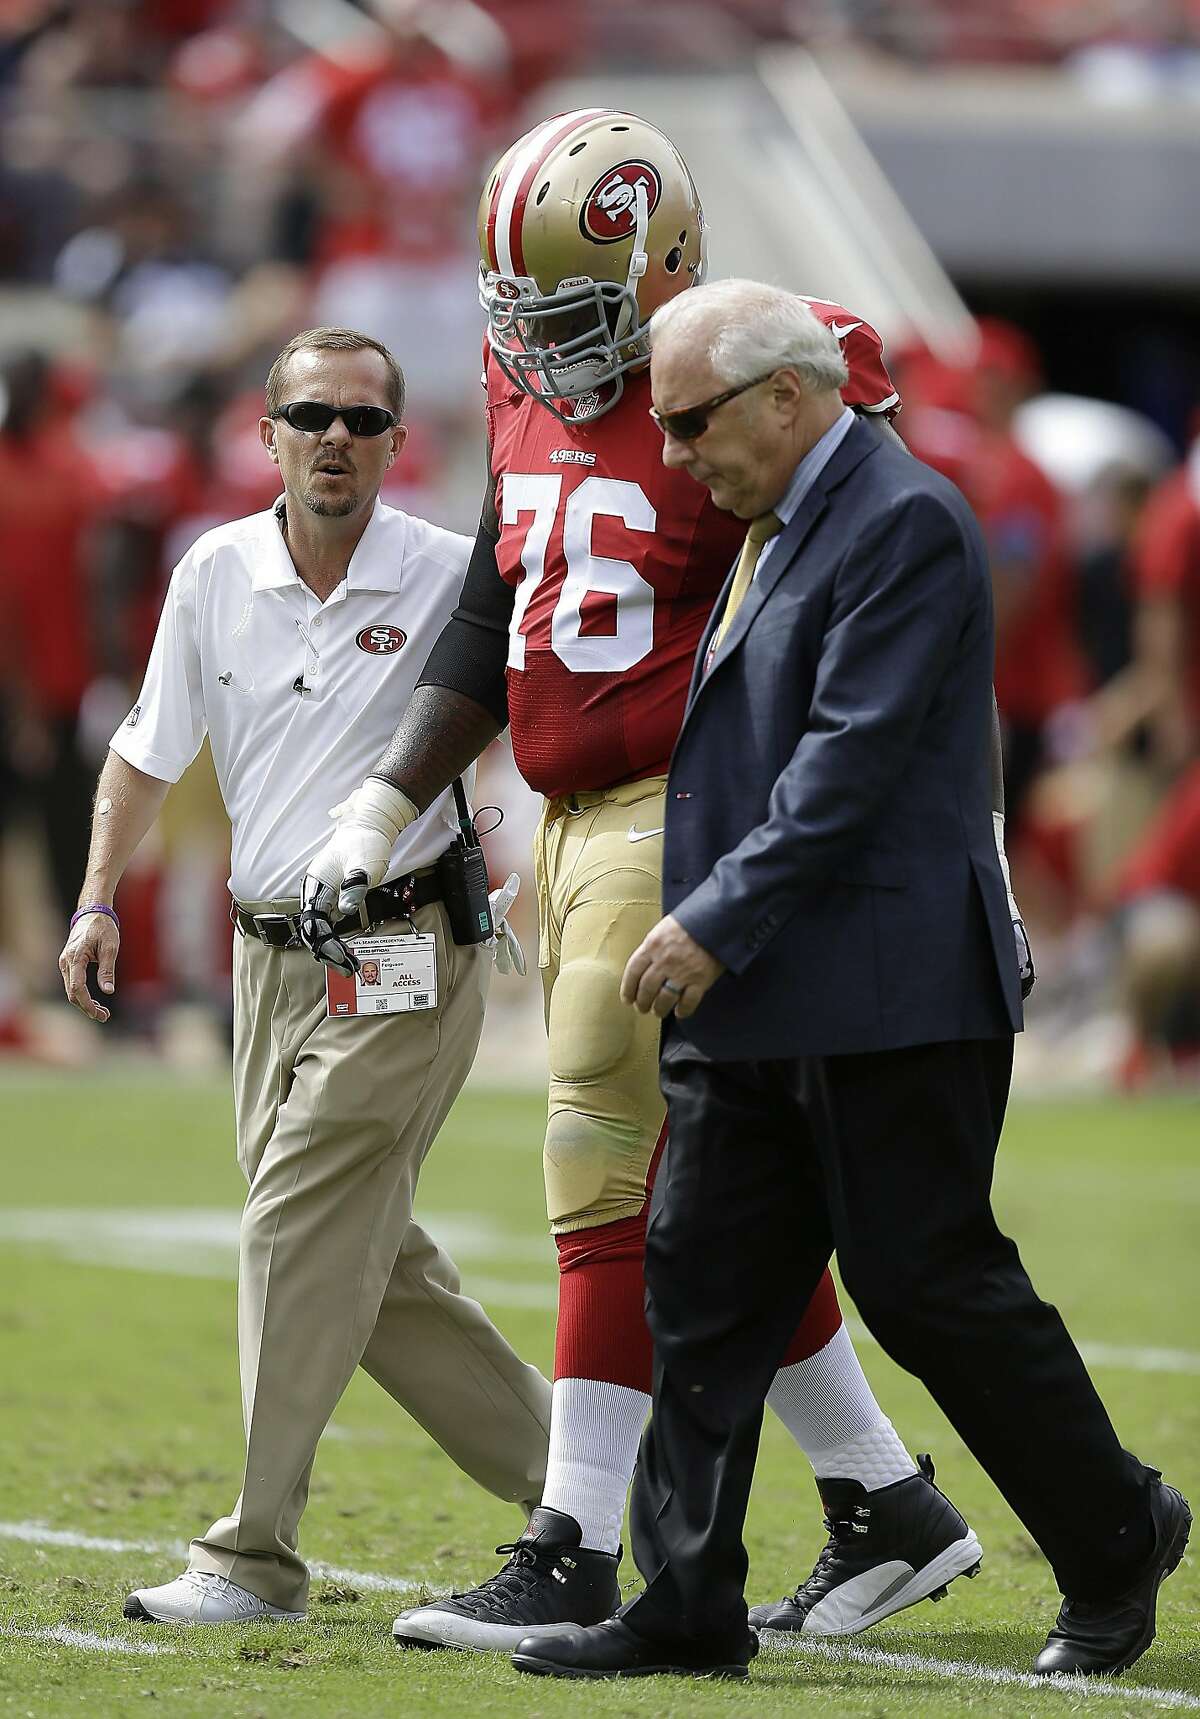 San Francisco 49ers offensive tackle Anthony Davis (76) walks off the field after being injured against the Philadelphia Eagles during the first half of an NFL football game in Santa Clara, Calif., Sunday, Sept. 28, 2014. (AP Photo/Ben Margot)